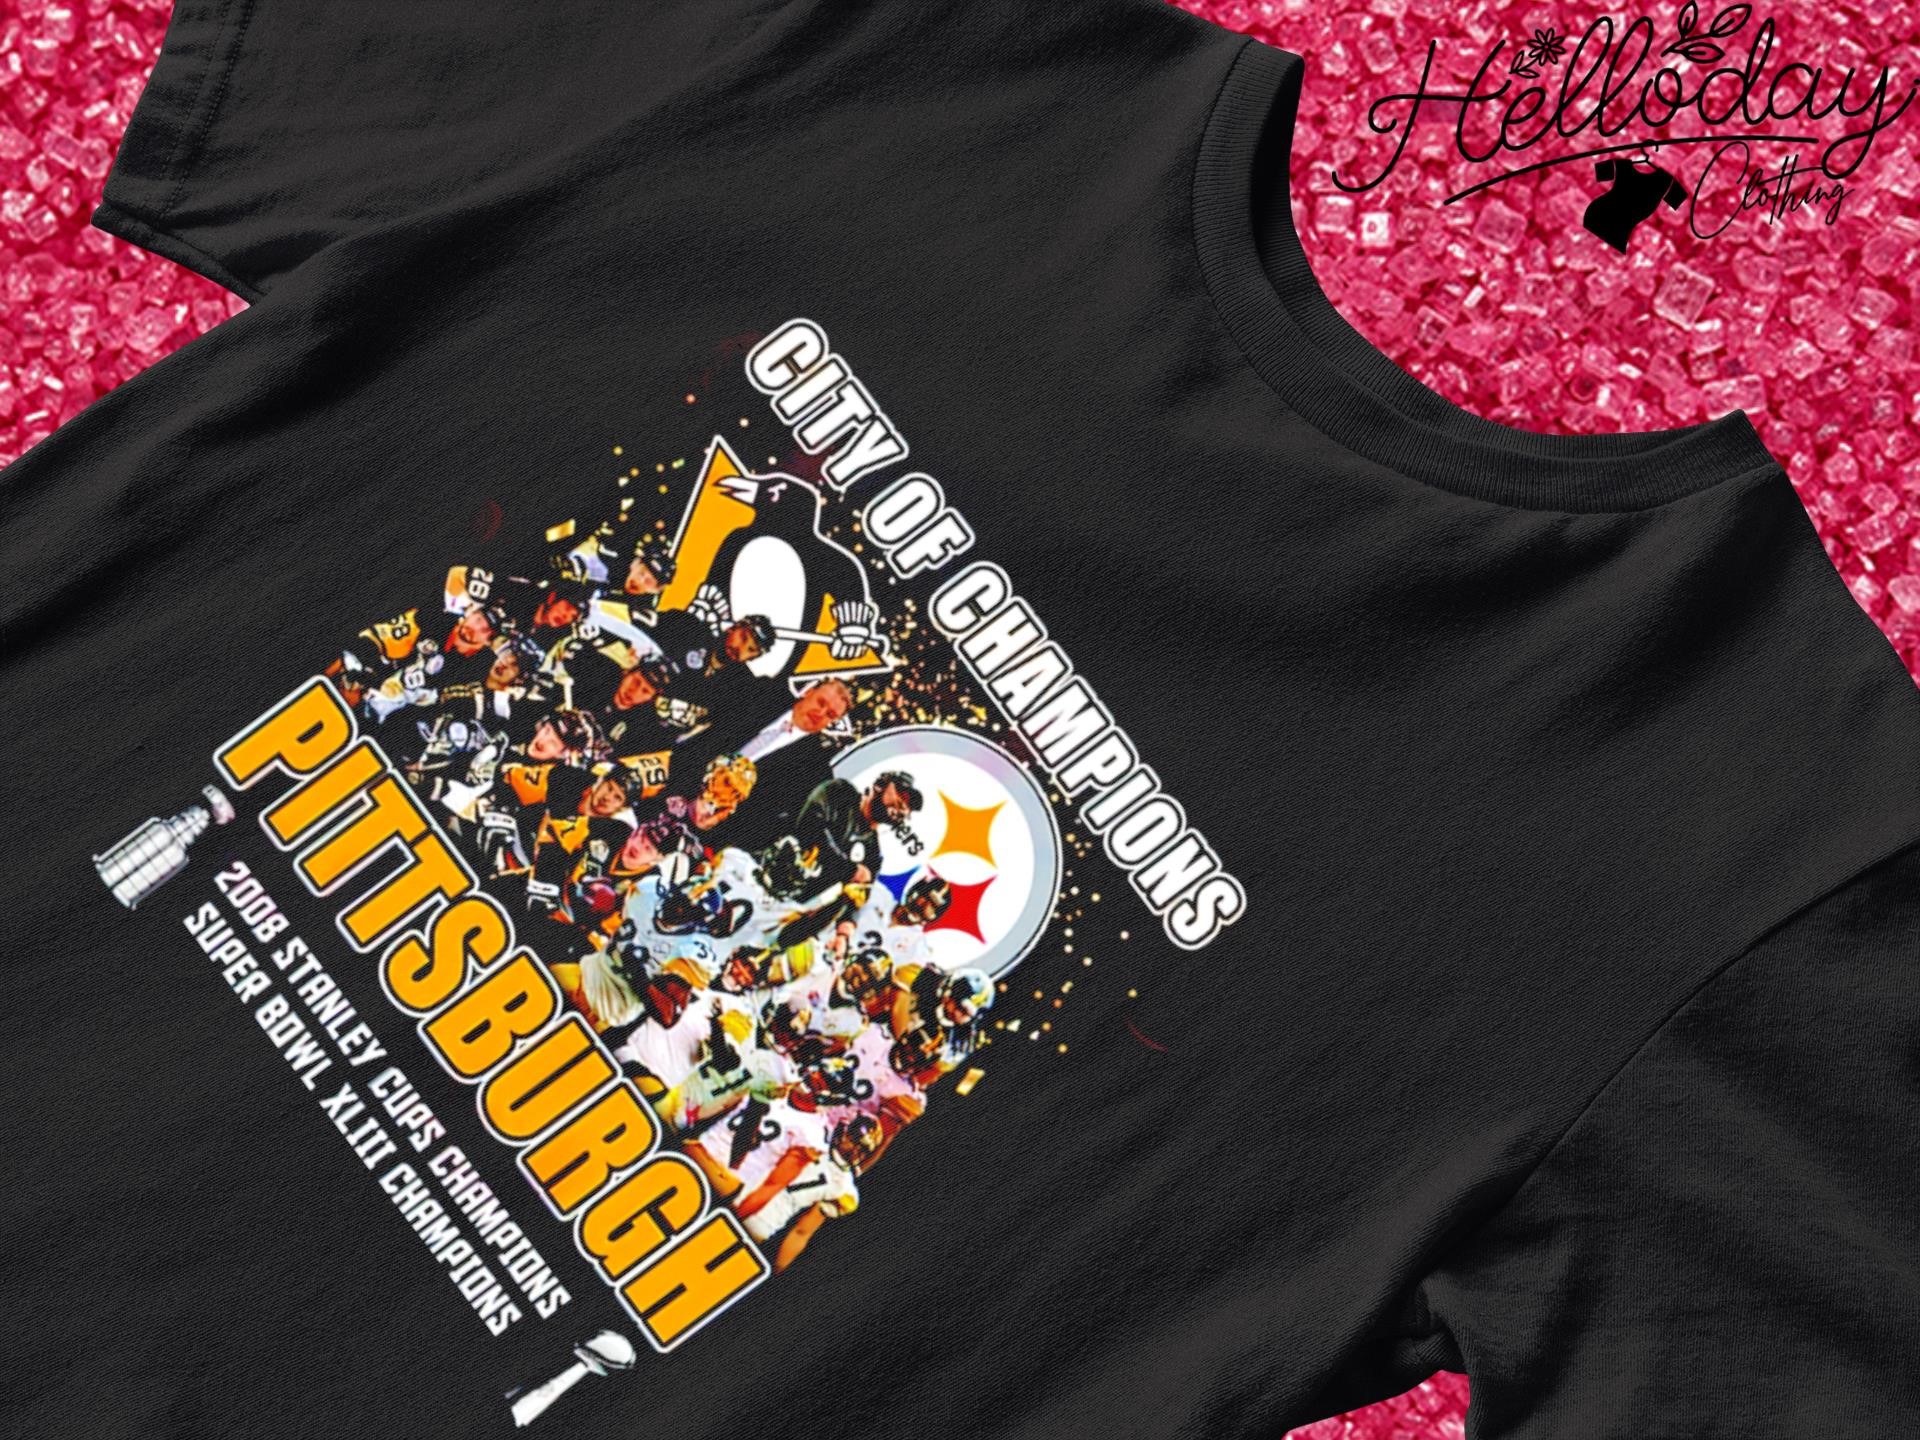 City of Champions Pittsburgh 2008 Stanley Cups Champions Super Bowl XLIII Champions shirt